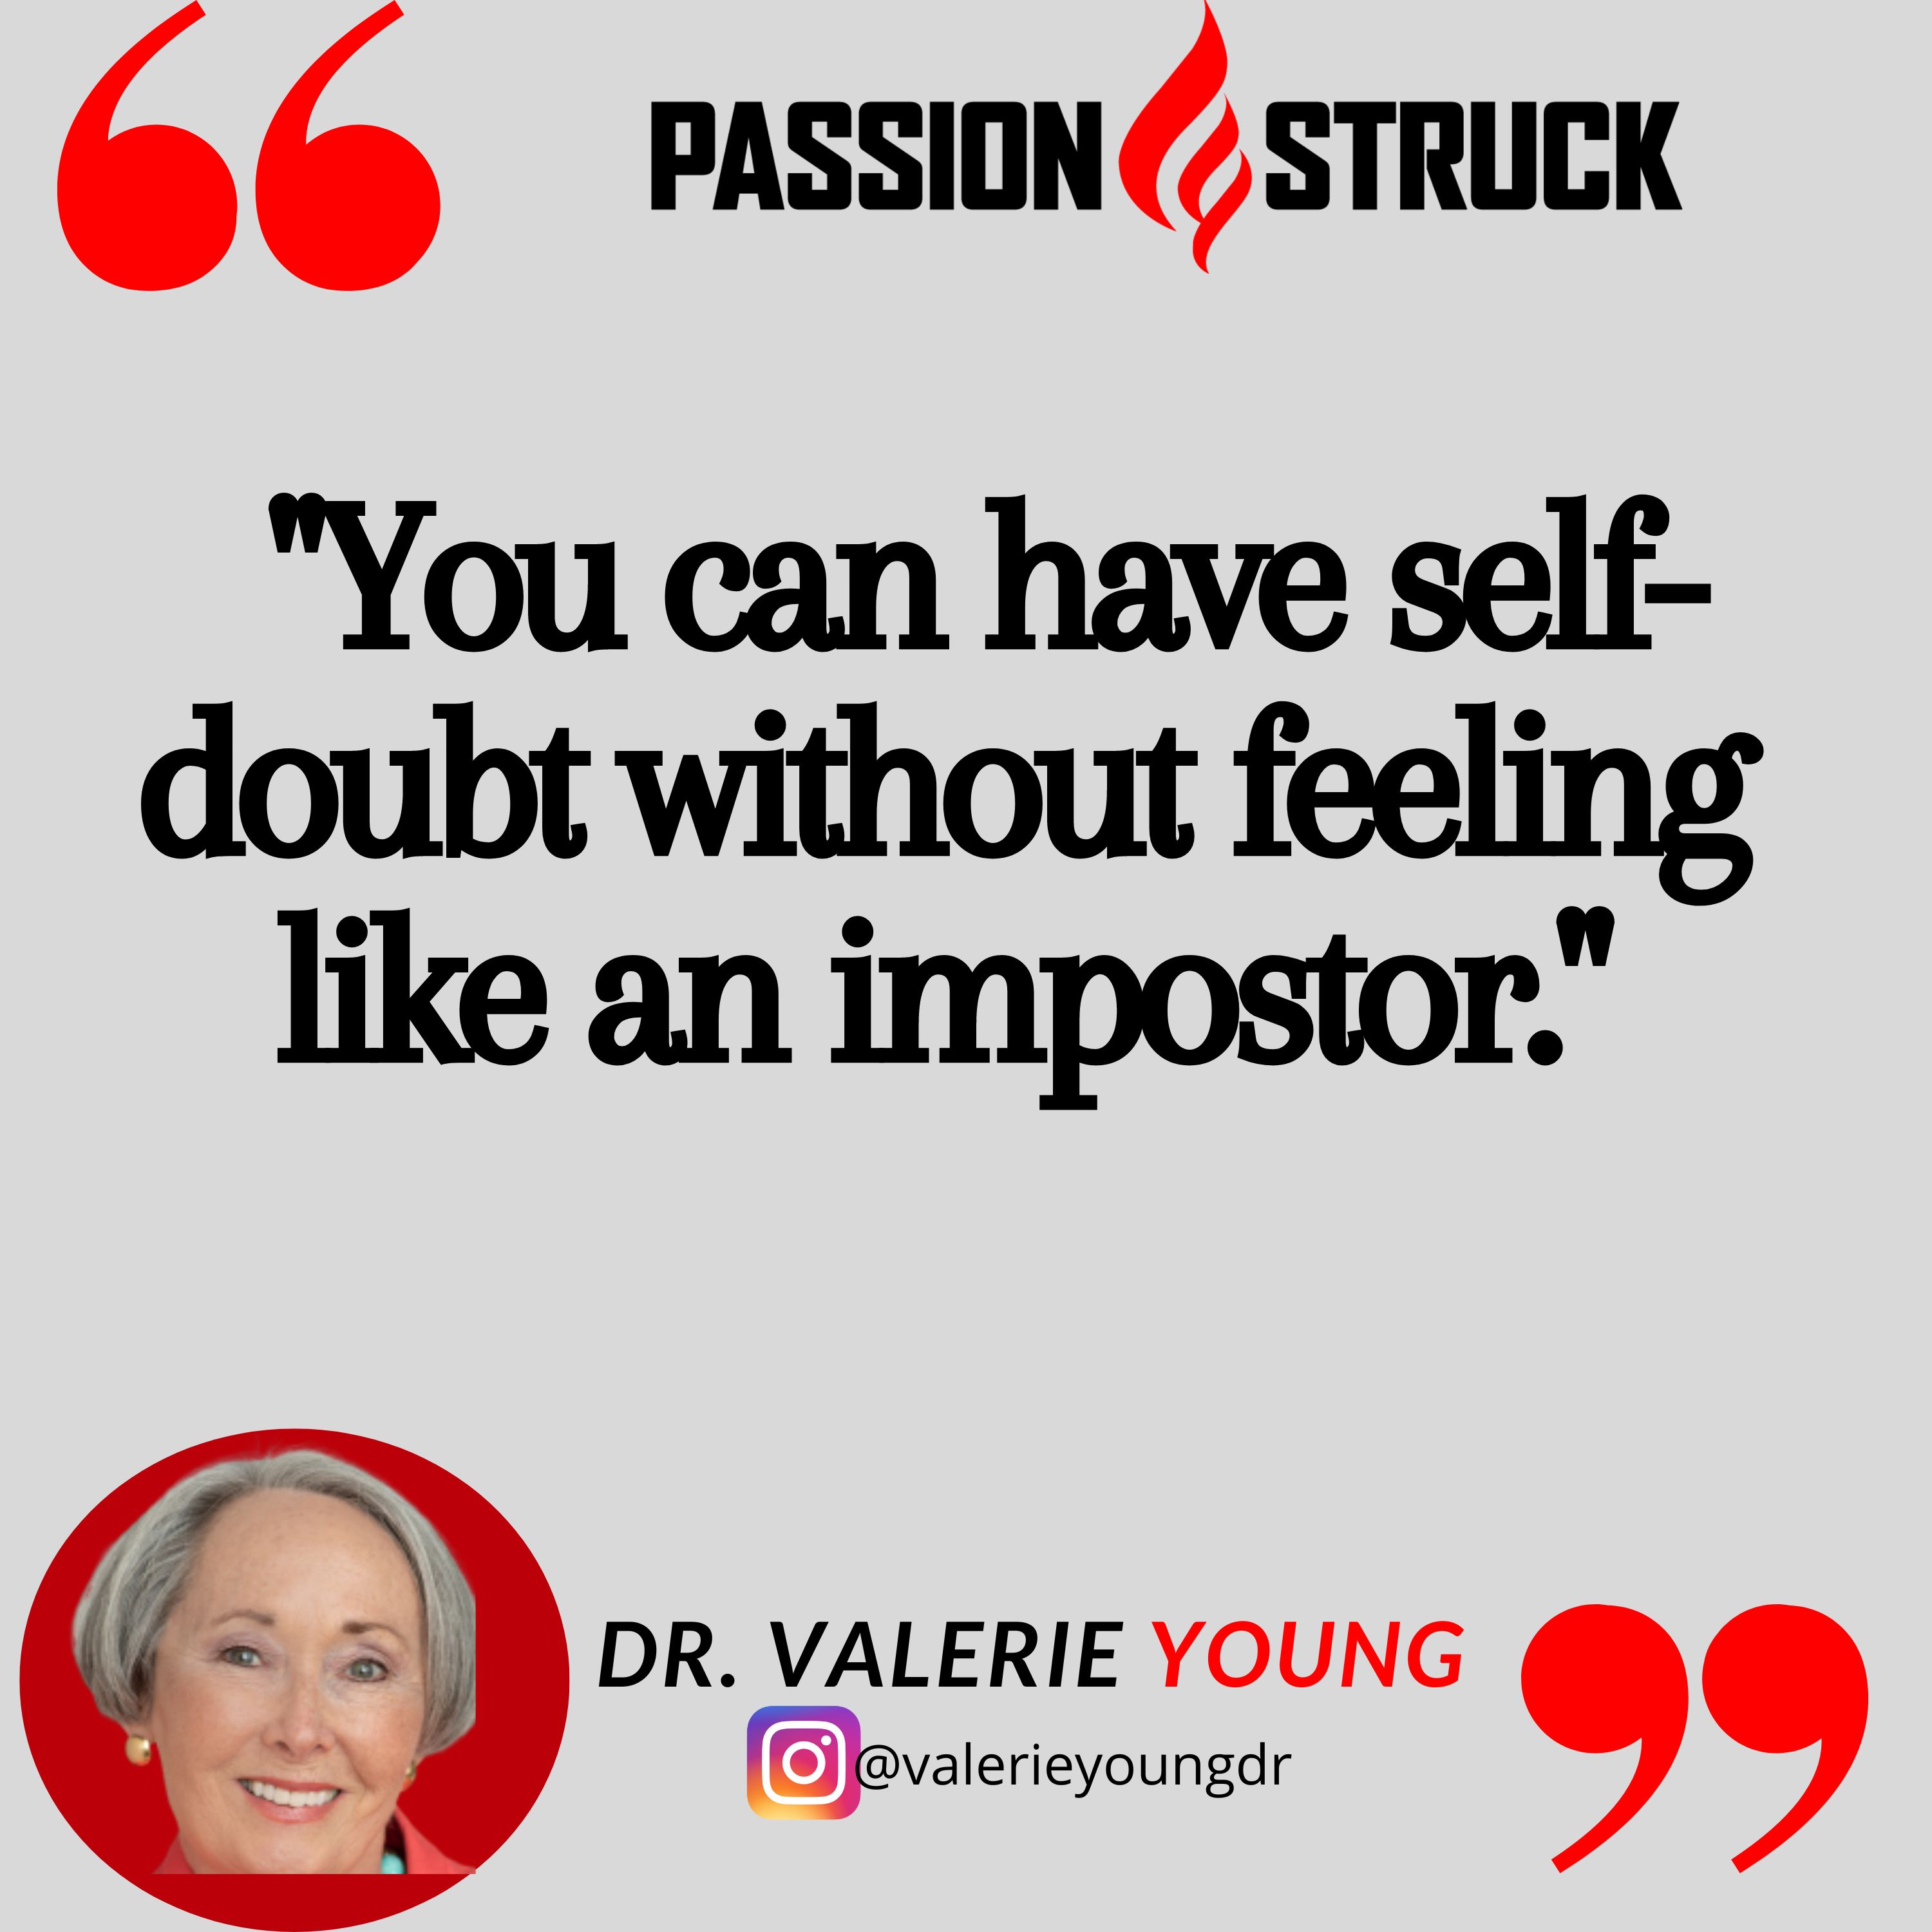 Dr. Valerie Young quote from the Passion Struck podcast, You can have self-doubt without feeling like an impostor."